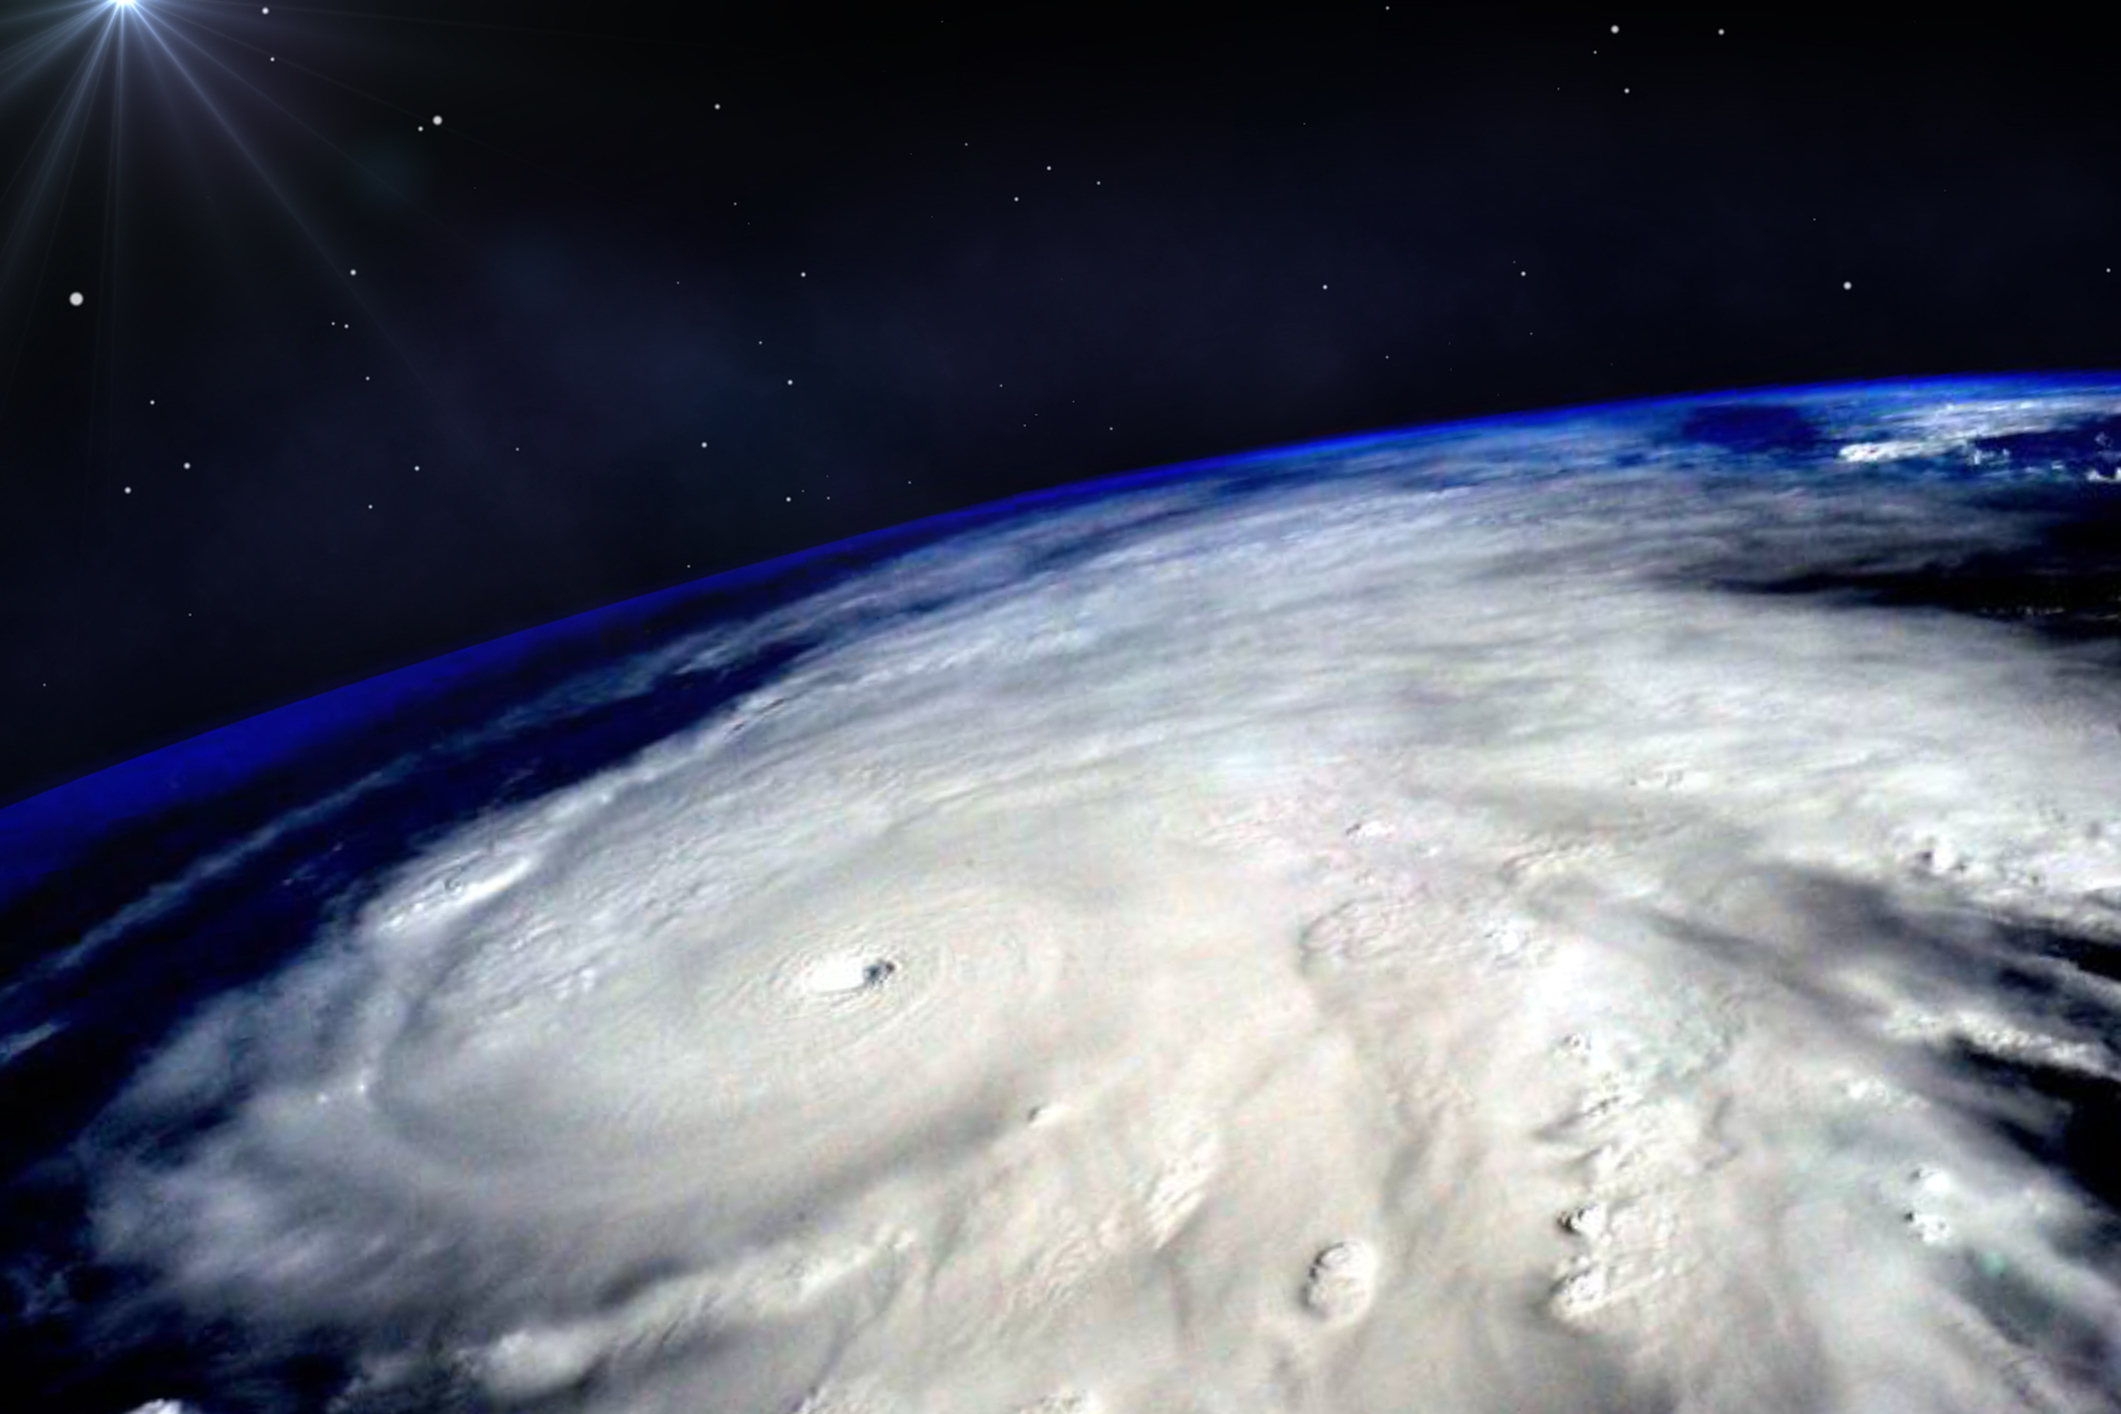 Hurricane typhoon over planet Earth viewed from space. Elements of image are furnished by NASA.